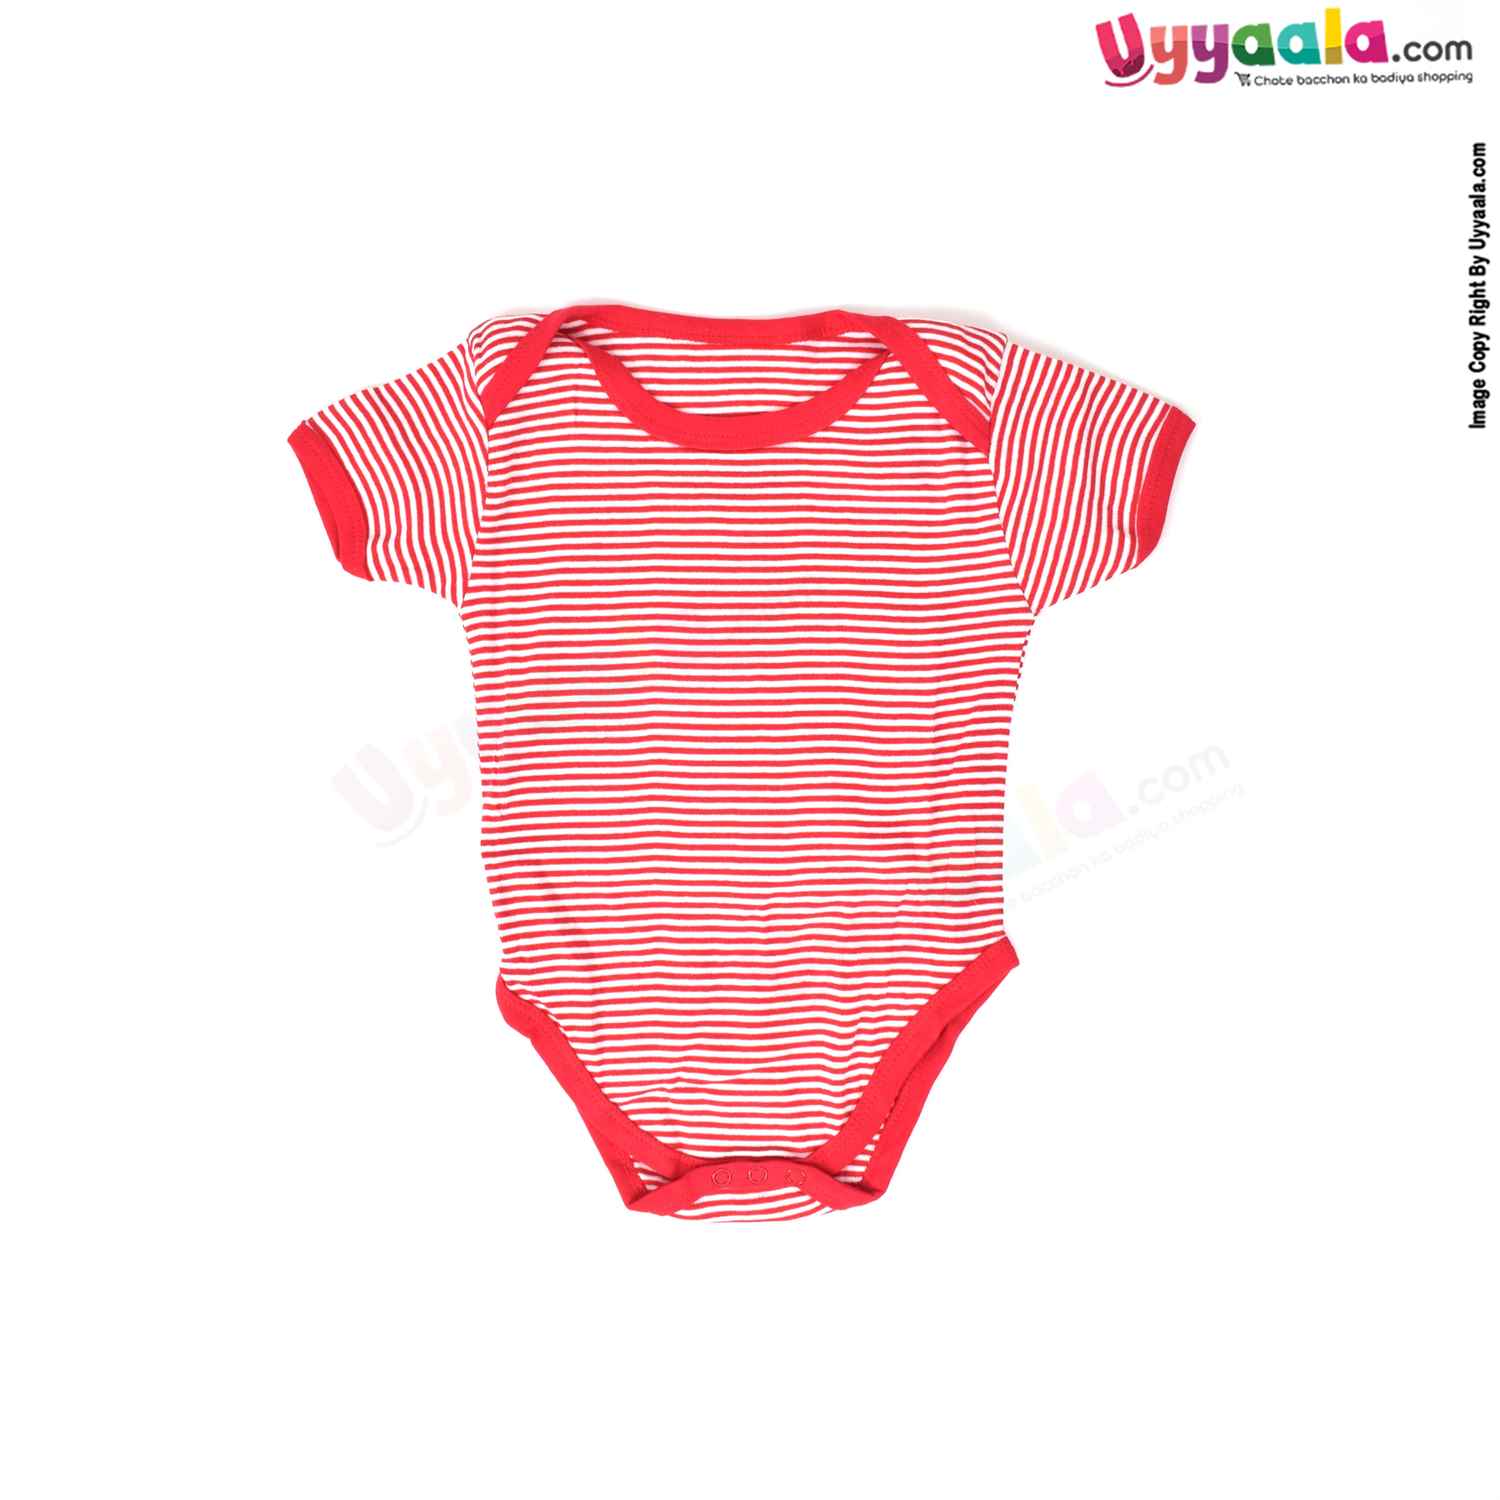 Precious One Short Sleeve Body Suit 100% Soft Hosiery Cotton - White & Red Stripes (9-12M)